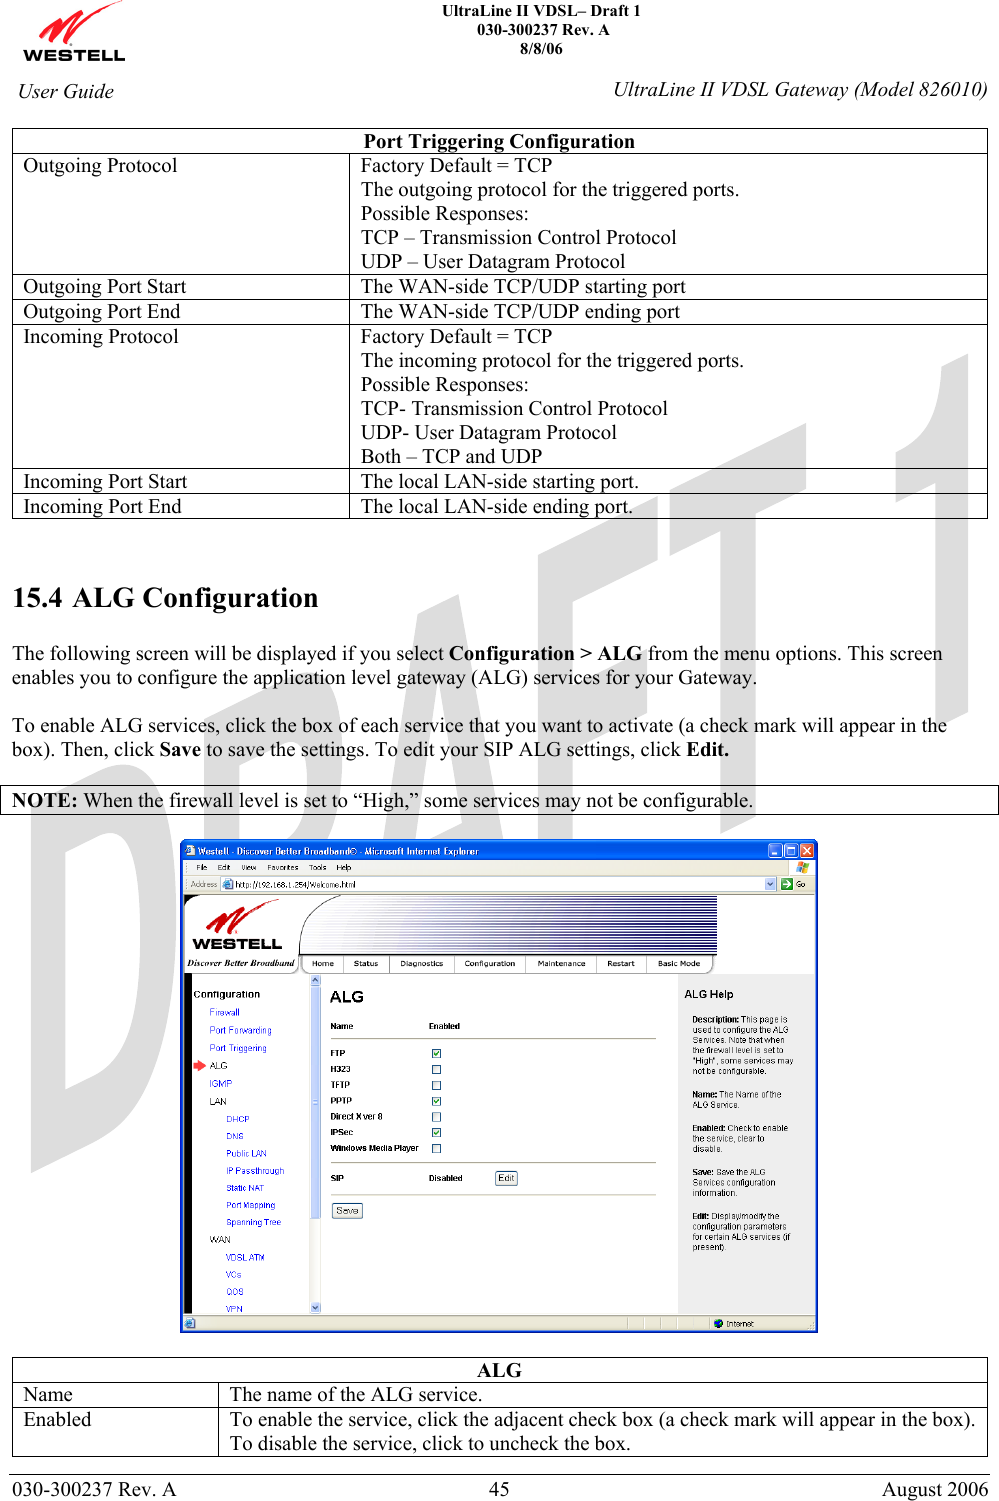    UltraLine II VDSL– Draft 1  030-300237 Rev. A 8/8/06   030-300237 Rev. A  45  August 2006  User Guide  UltraLine II VDSL Gateway (Model 826010) Port Triggering Configuration Outgoing Protocol  Factory Default = TCP The outgoing protocol for the triggered ports. Possible Responses: TCP – Transmission Control Protocol UDP – User Datagram Protocol Outgoing Port Start  The WAN-side TCP/UDP starting port Outgoing Port End   The WAN-side TCP/UDP ending port Incoming Protocol  Factory Default = TCP The incoming protocol for the triggered ports. Possible Responses: TCP- Transmission Control Protocol UDP- User Datagram Protocol Both – TCP and UDP Incoming Port Start  The local LAN-side starting port. Incoming Port End  The local LAN-side ending port.   15.4 ALG Configuration  The following screen will be displayed if you select Configuration &gt; ALG from the menu options. This screen enables you to configure the application level gateway (ALG) services for your Gateway.   To enable ALG services, click the box of each service that you want to activate (a check mark will appear in the box). Then, click Save to save the settings. To edit your SIP ALG settings, click Edit.  NOTE: When the firewall level is set to “High,” some services may not be configurable.    ALG Name  The name of the ALG service. Enabled  To enable the service, click the adjacent check box (a check mark will appear in the box). To disable the service, click to uncheck the box. 